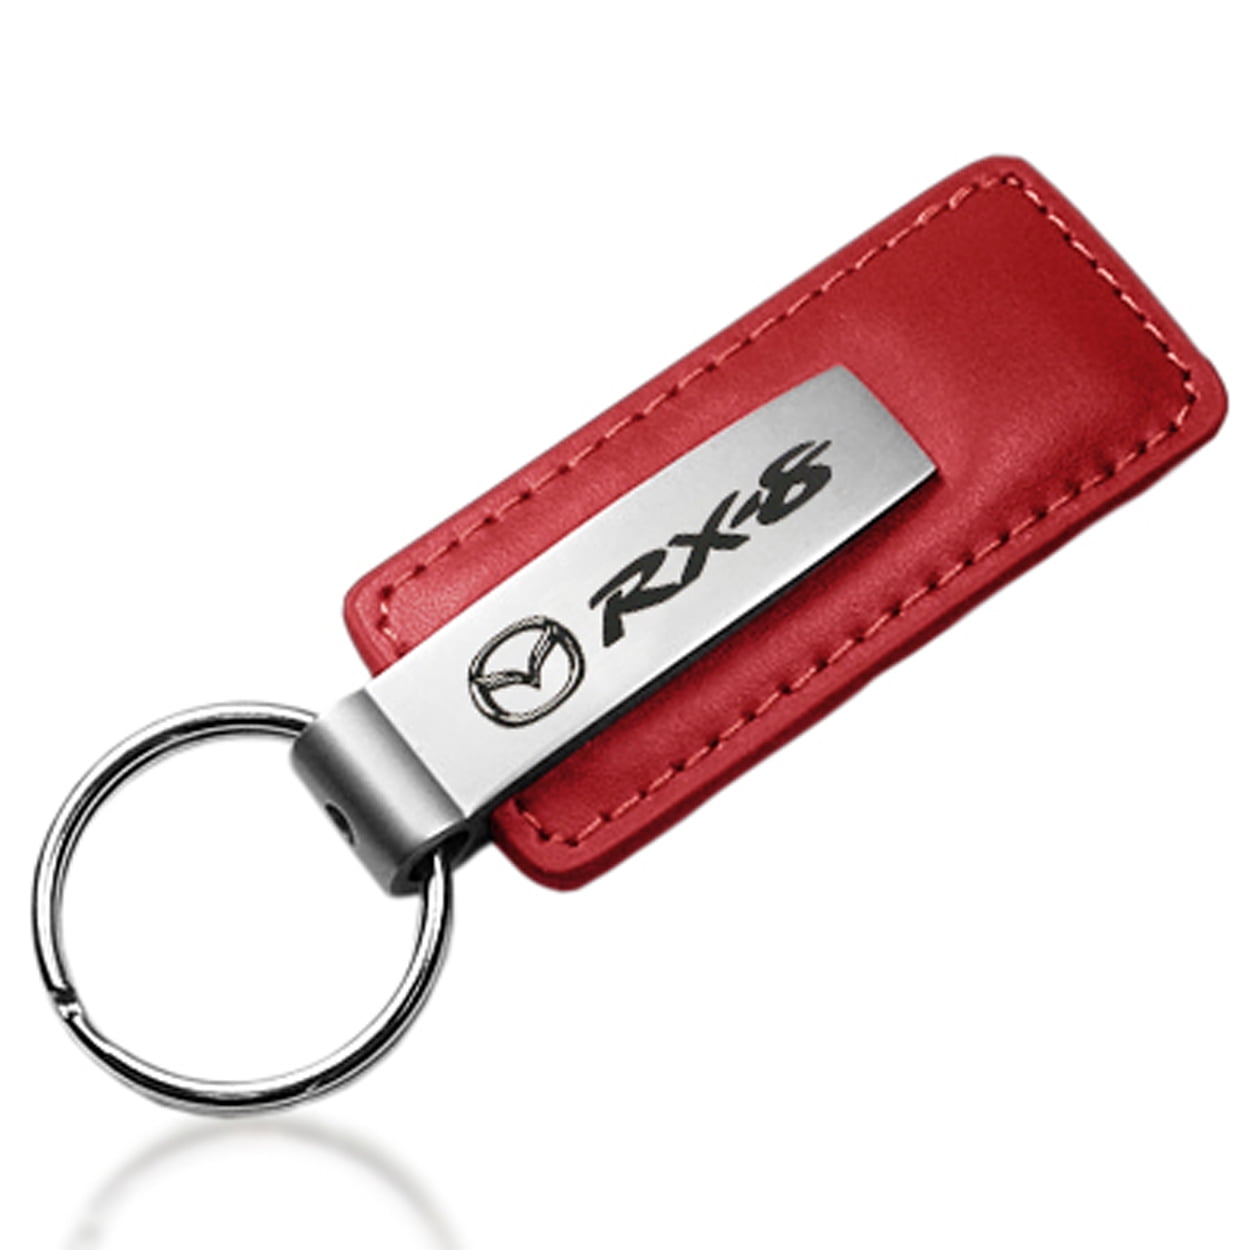 Details about   Mazda Key Ring Red and Chrome Leather Rectangular Keychain 